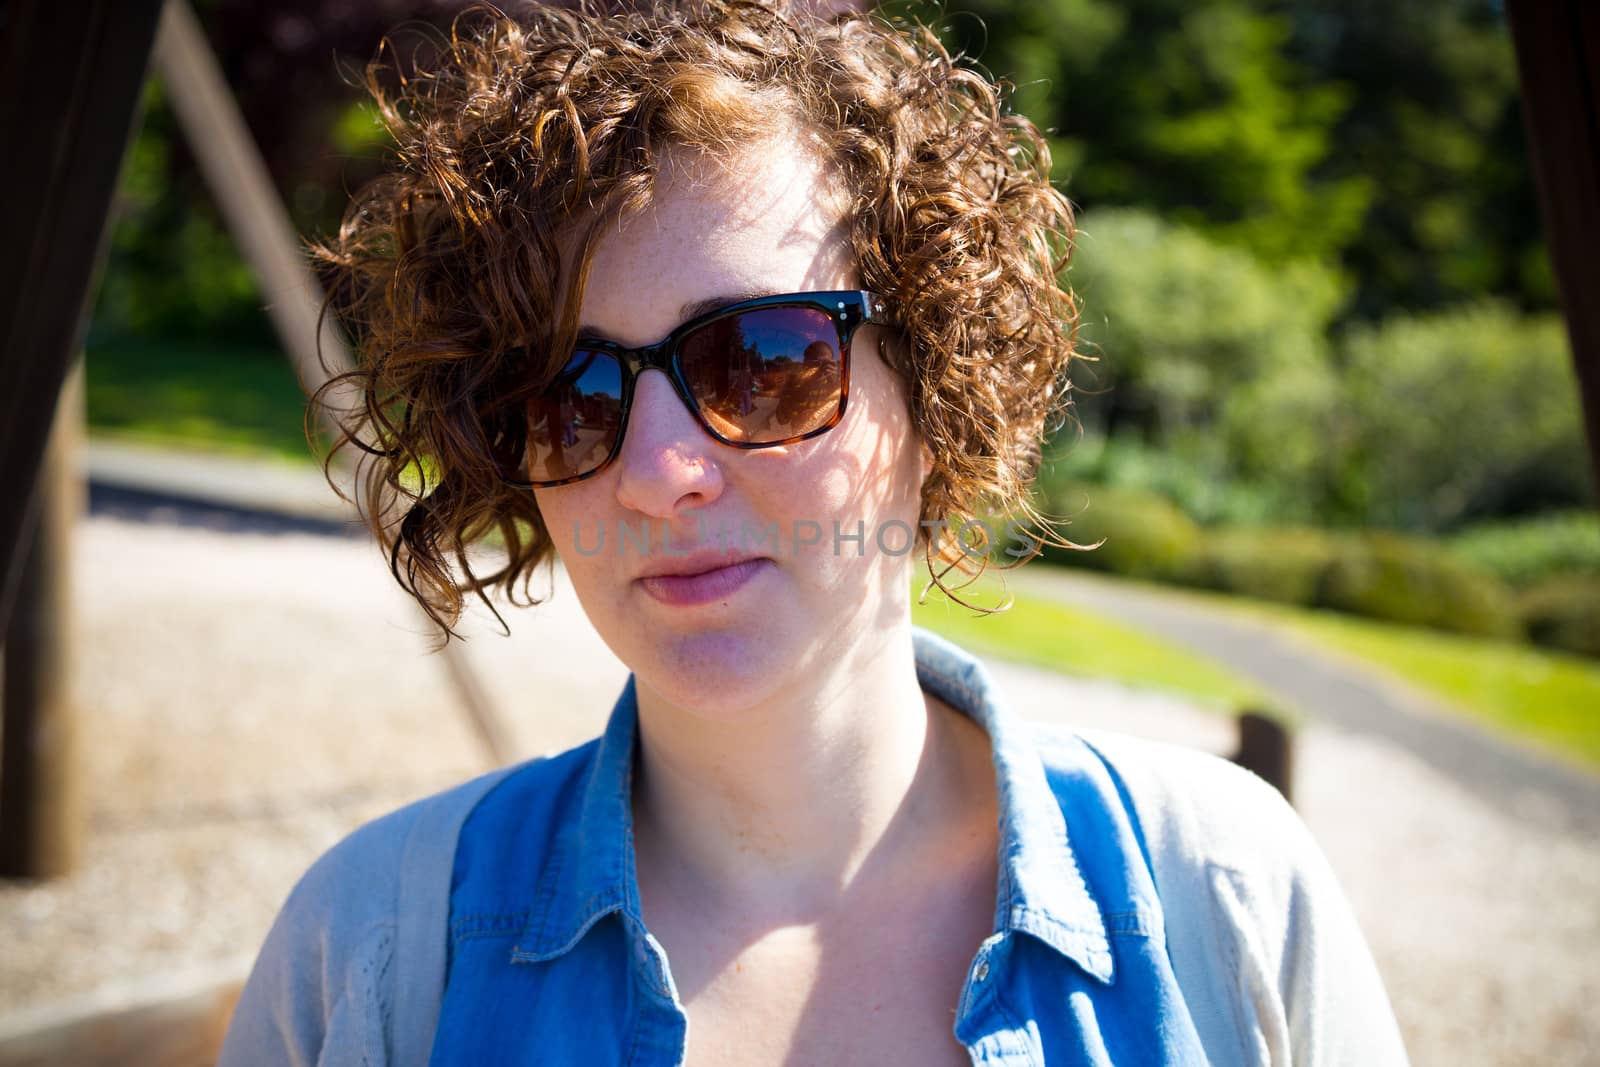 This beautiful attractive woman wears sunglasses outdoors at a park for a simple portrait of a female person.